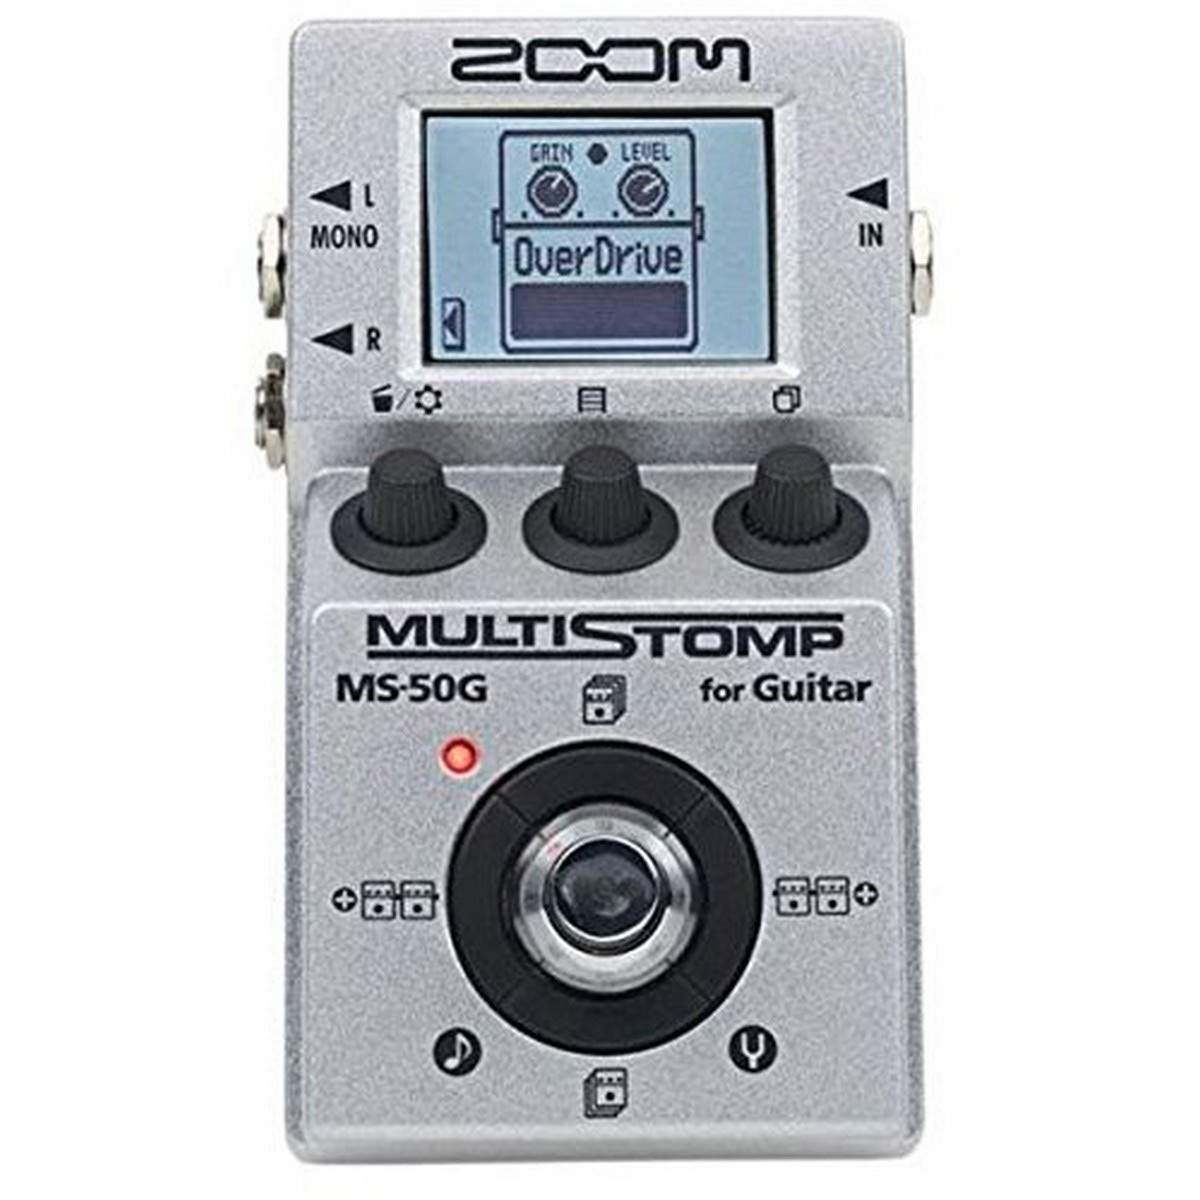 Zoom MS-50G MultiStomp Guitar Effects Pedal, Single Sto...